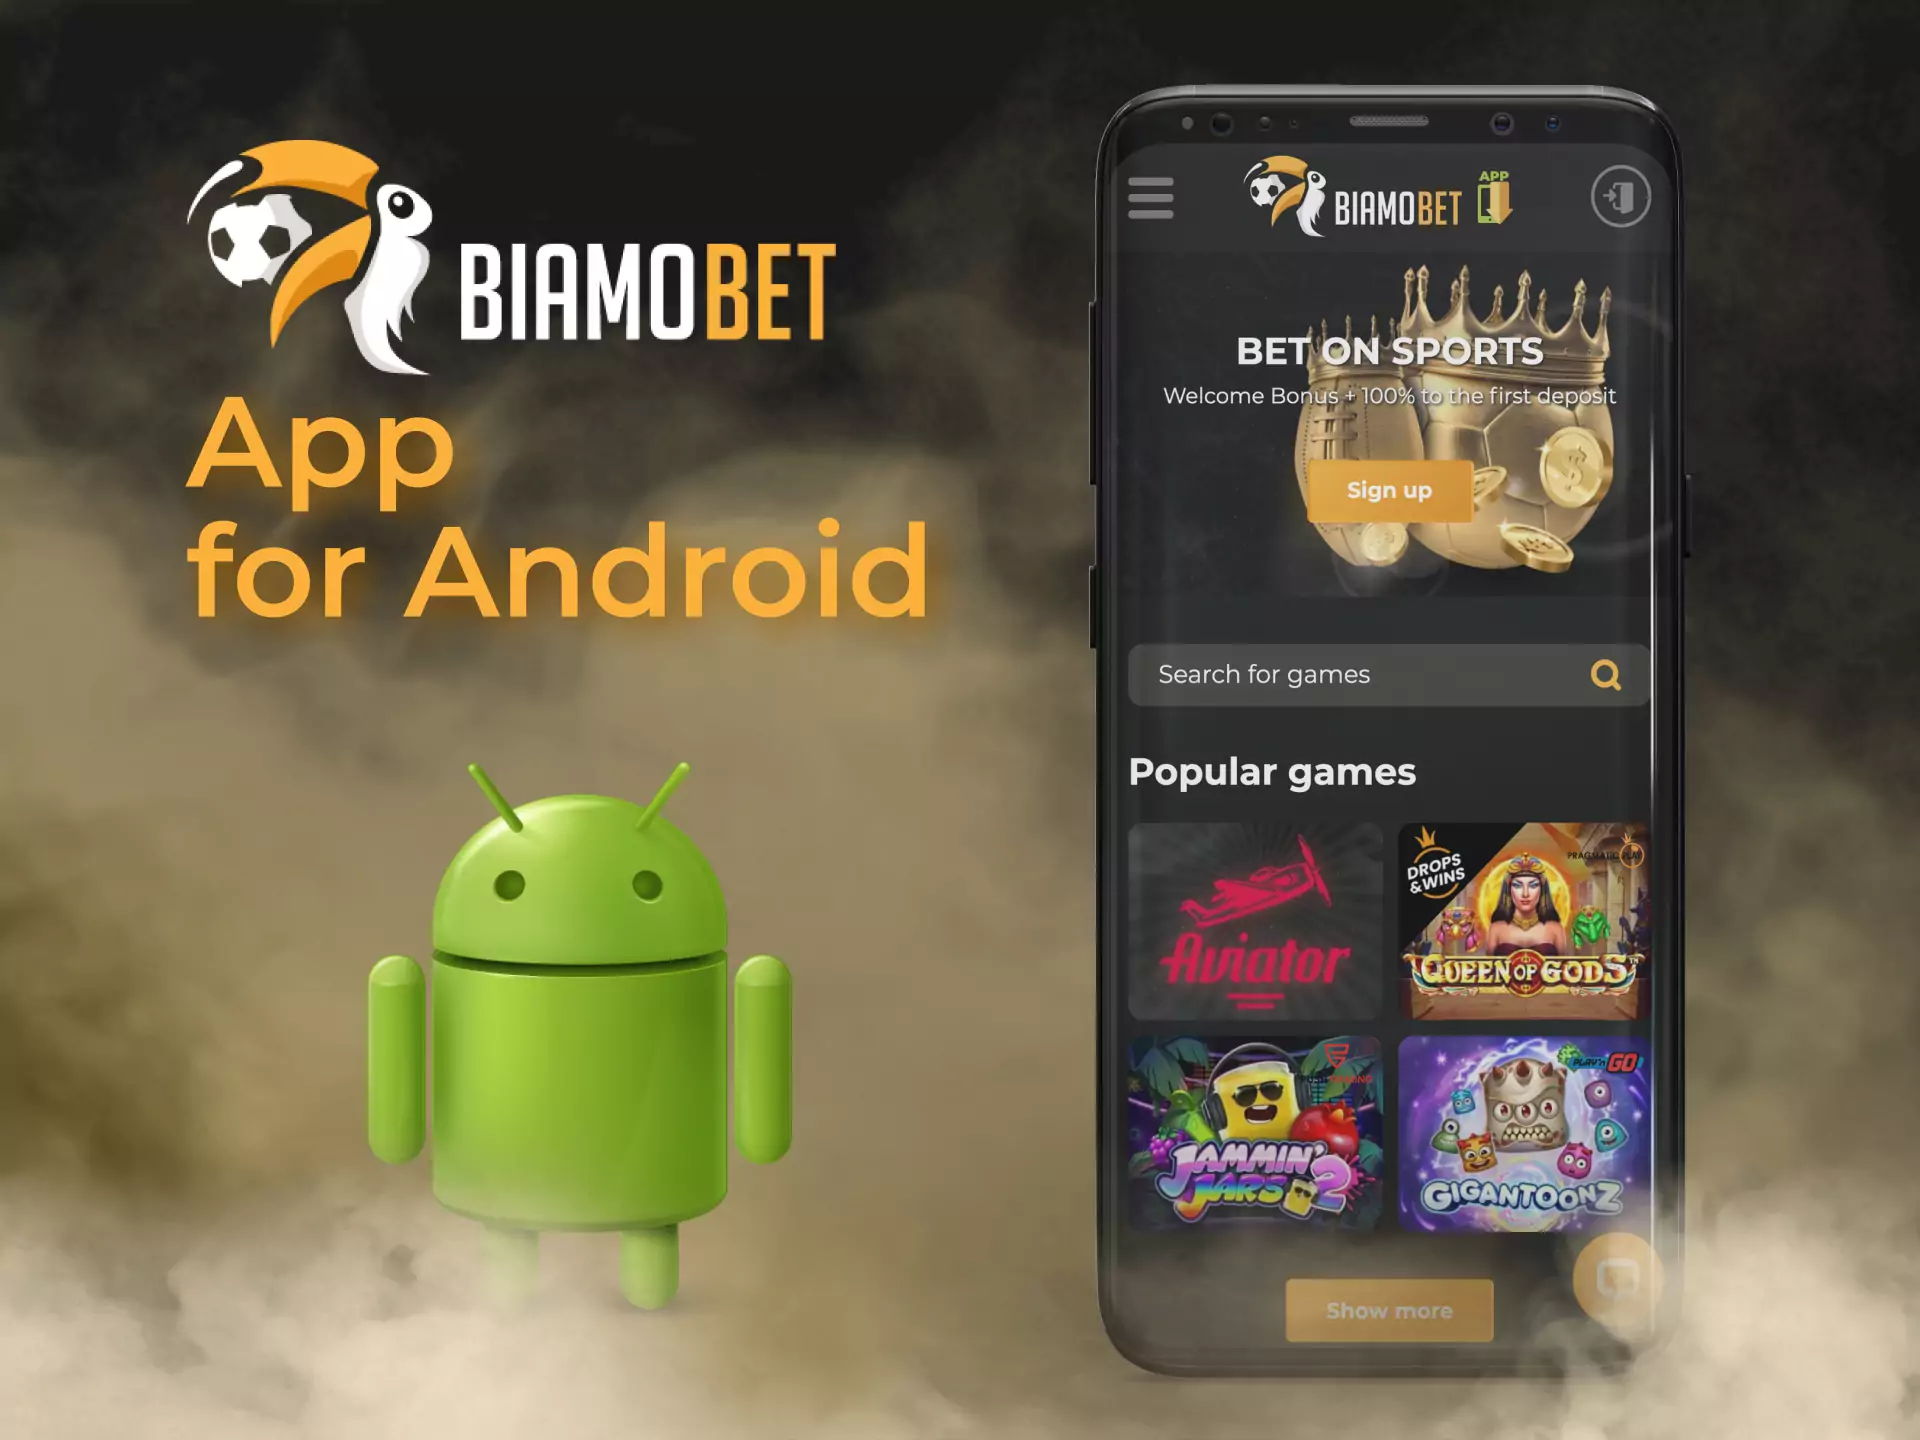 The Biamobet app for Android can be downloaded from the official website.